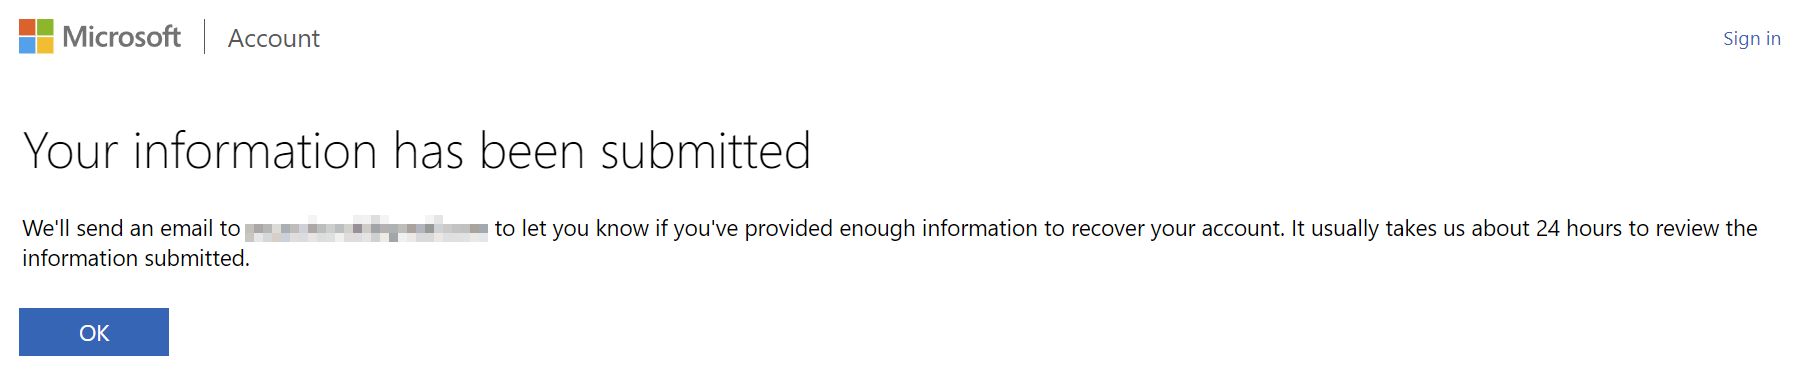 microsoft account recovery your information has been submitted